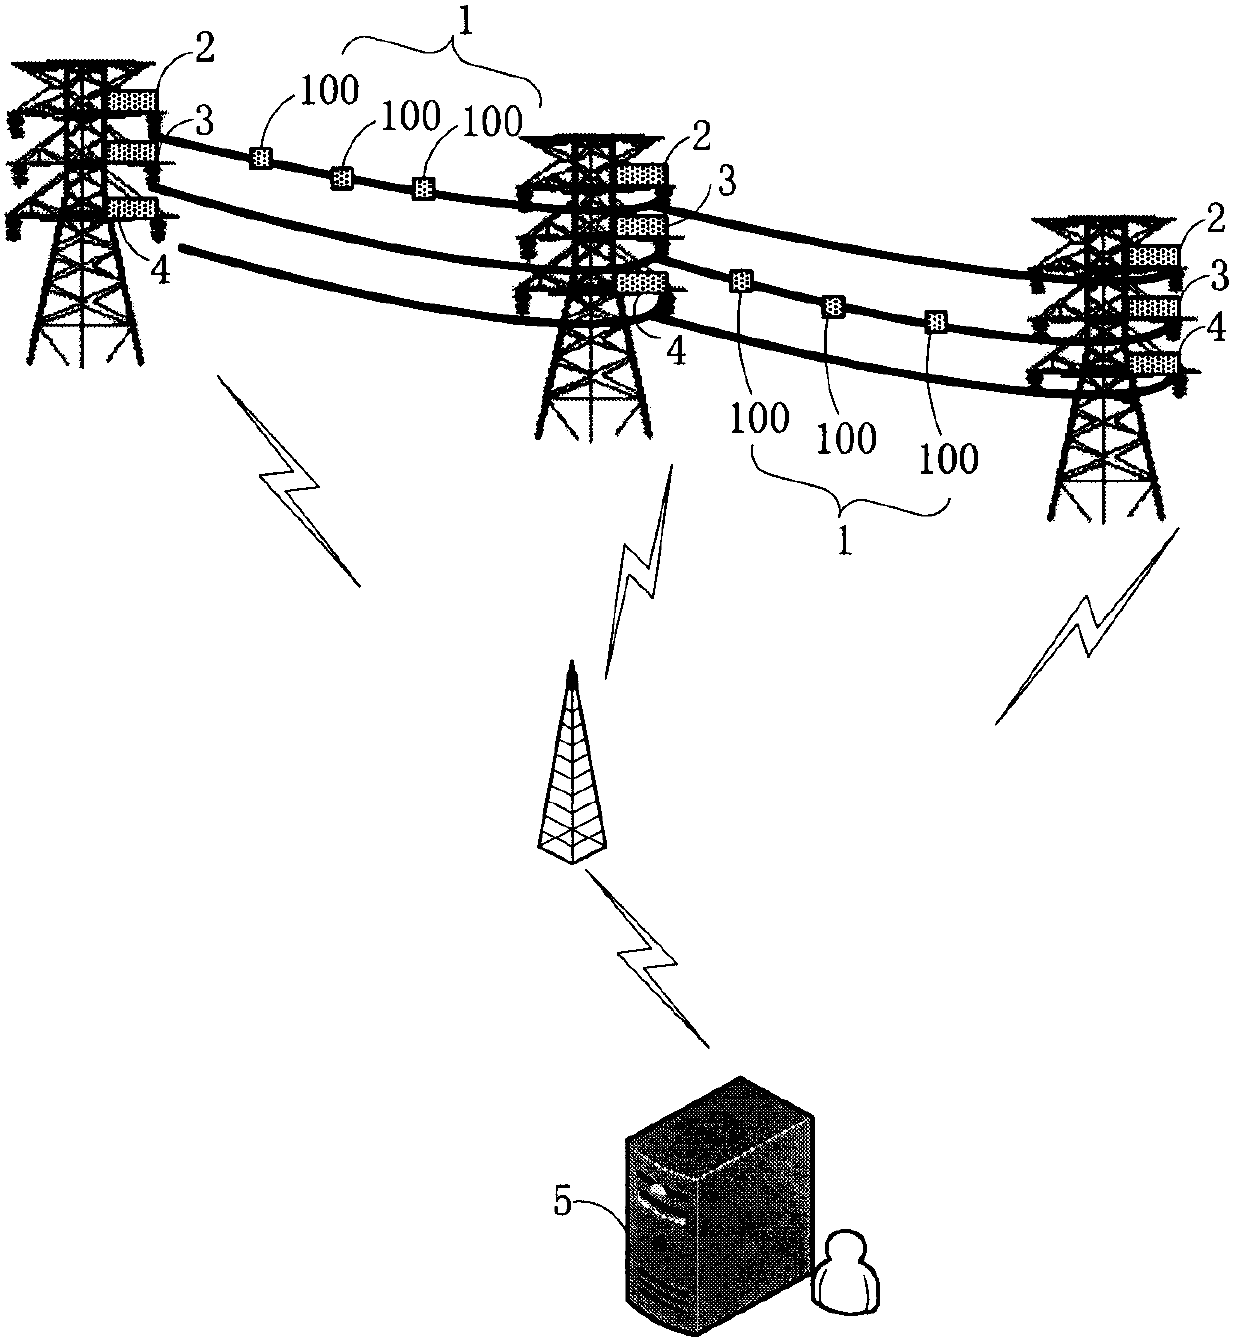 Online monitoring and early warning system for galloping of power transmission line